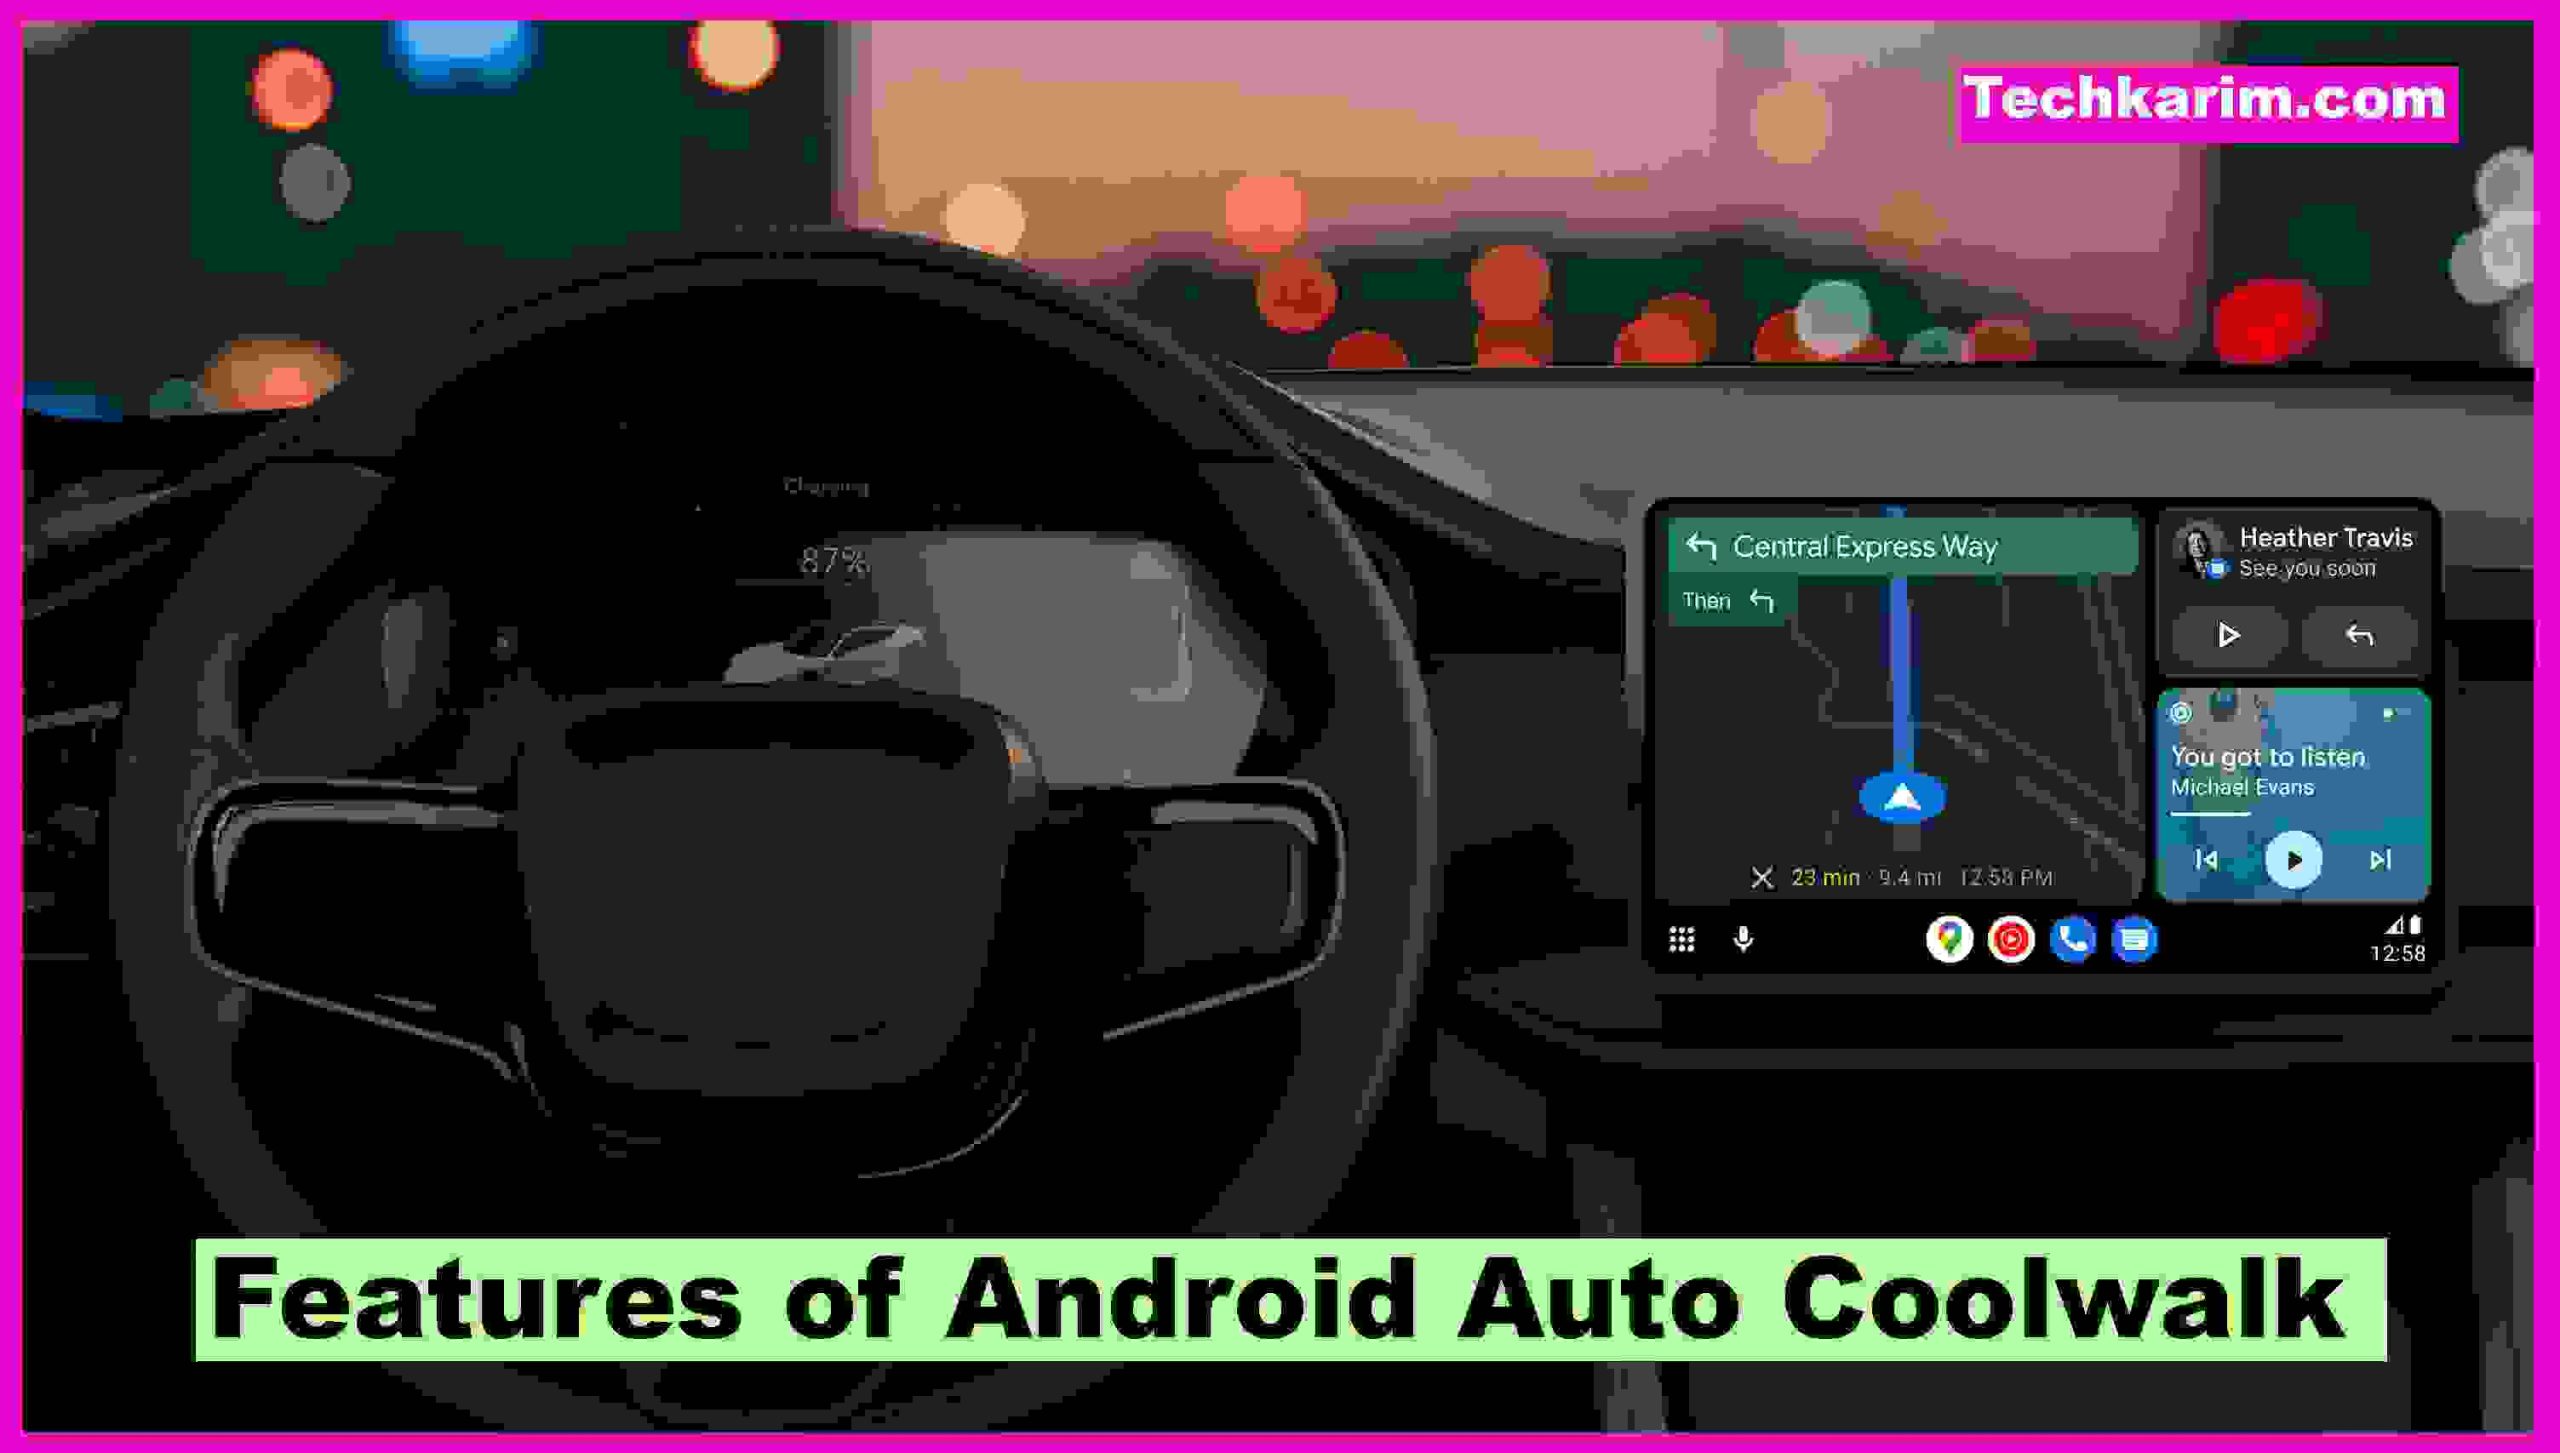 Features of Android Auto Coolwalk